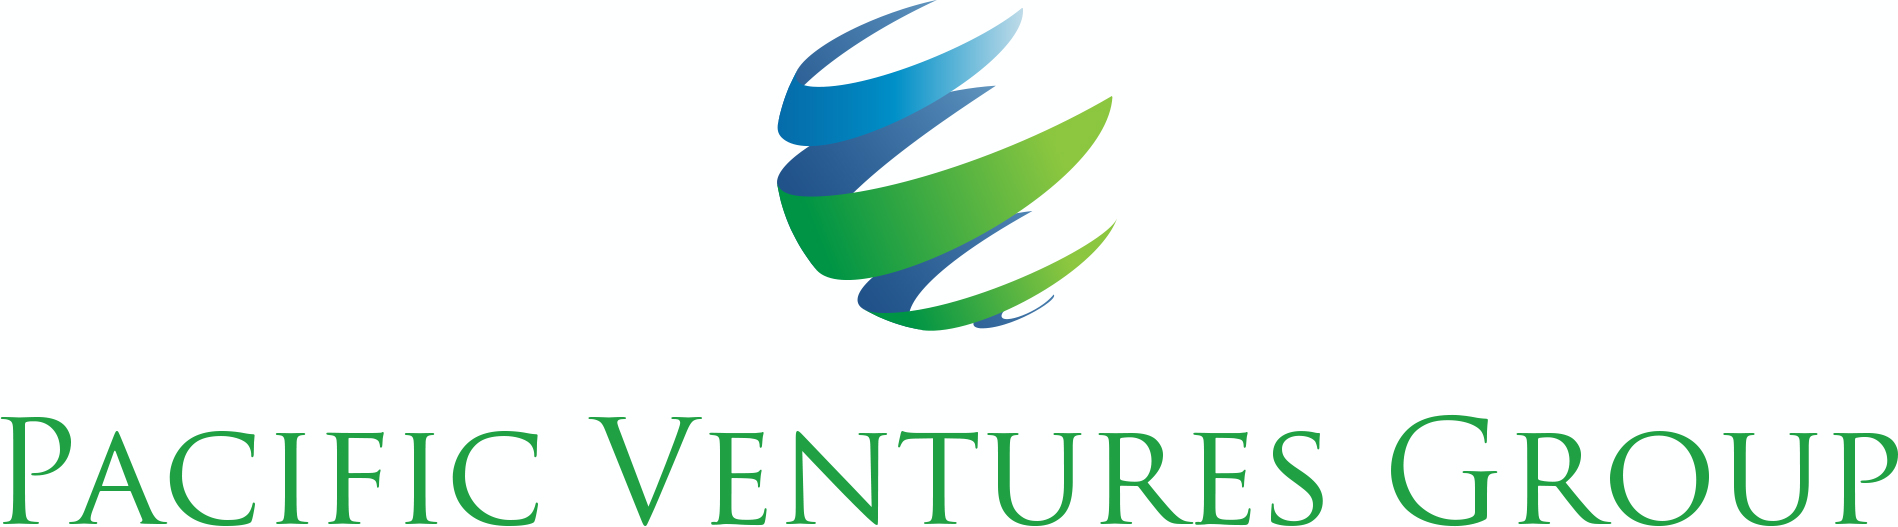 Pacific Ventures Group INC, Wednesday, August 5, 2020, Press release picture